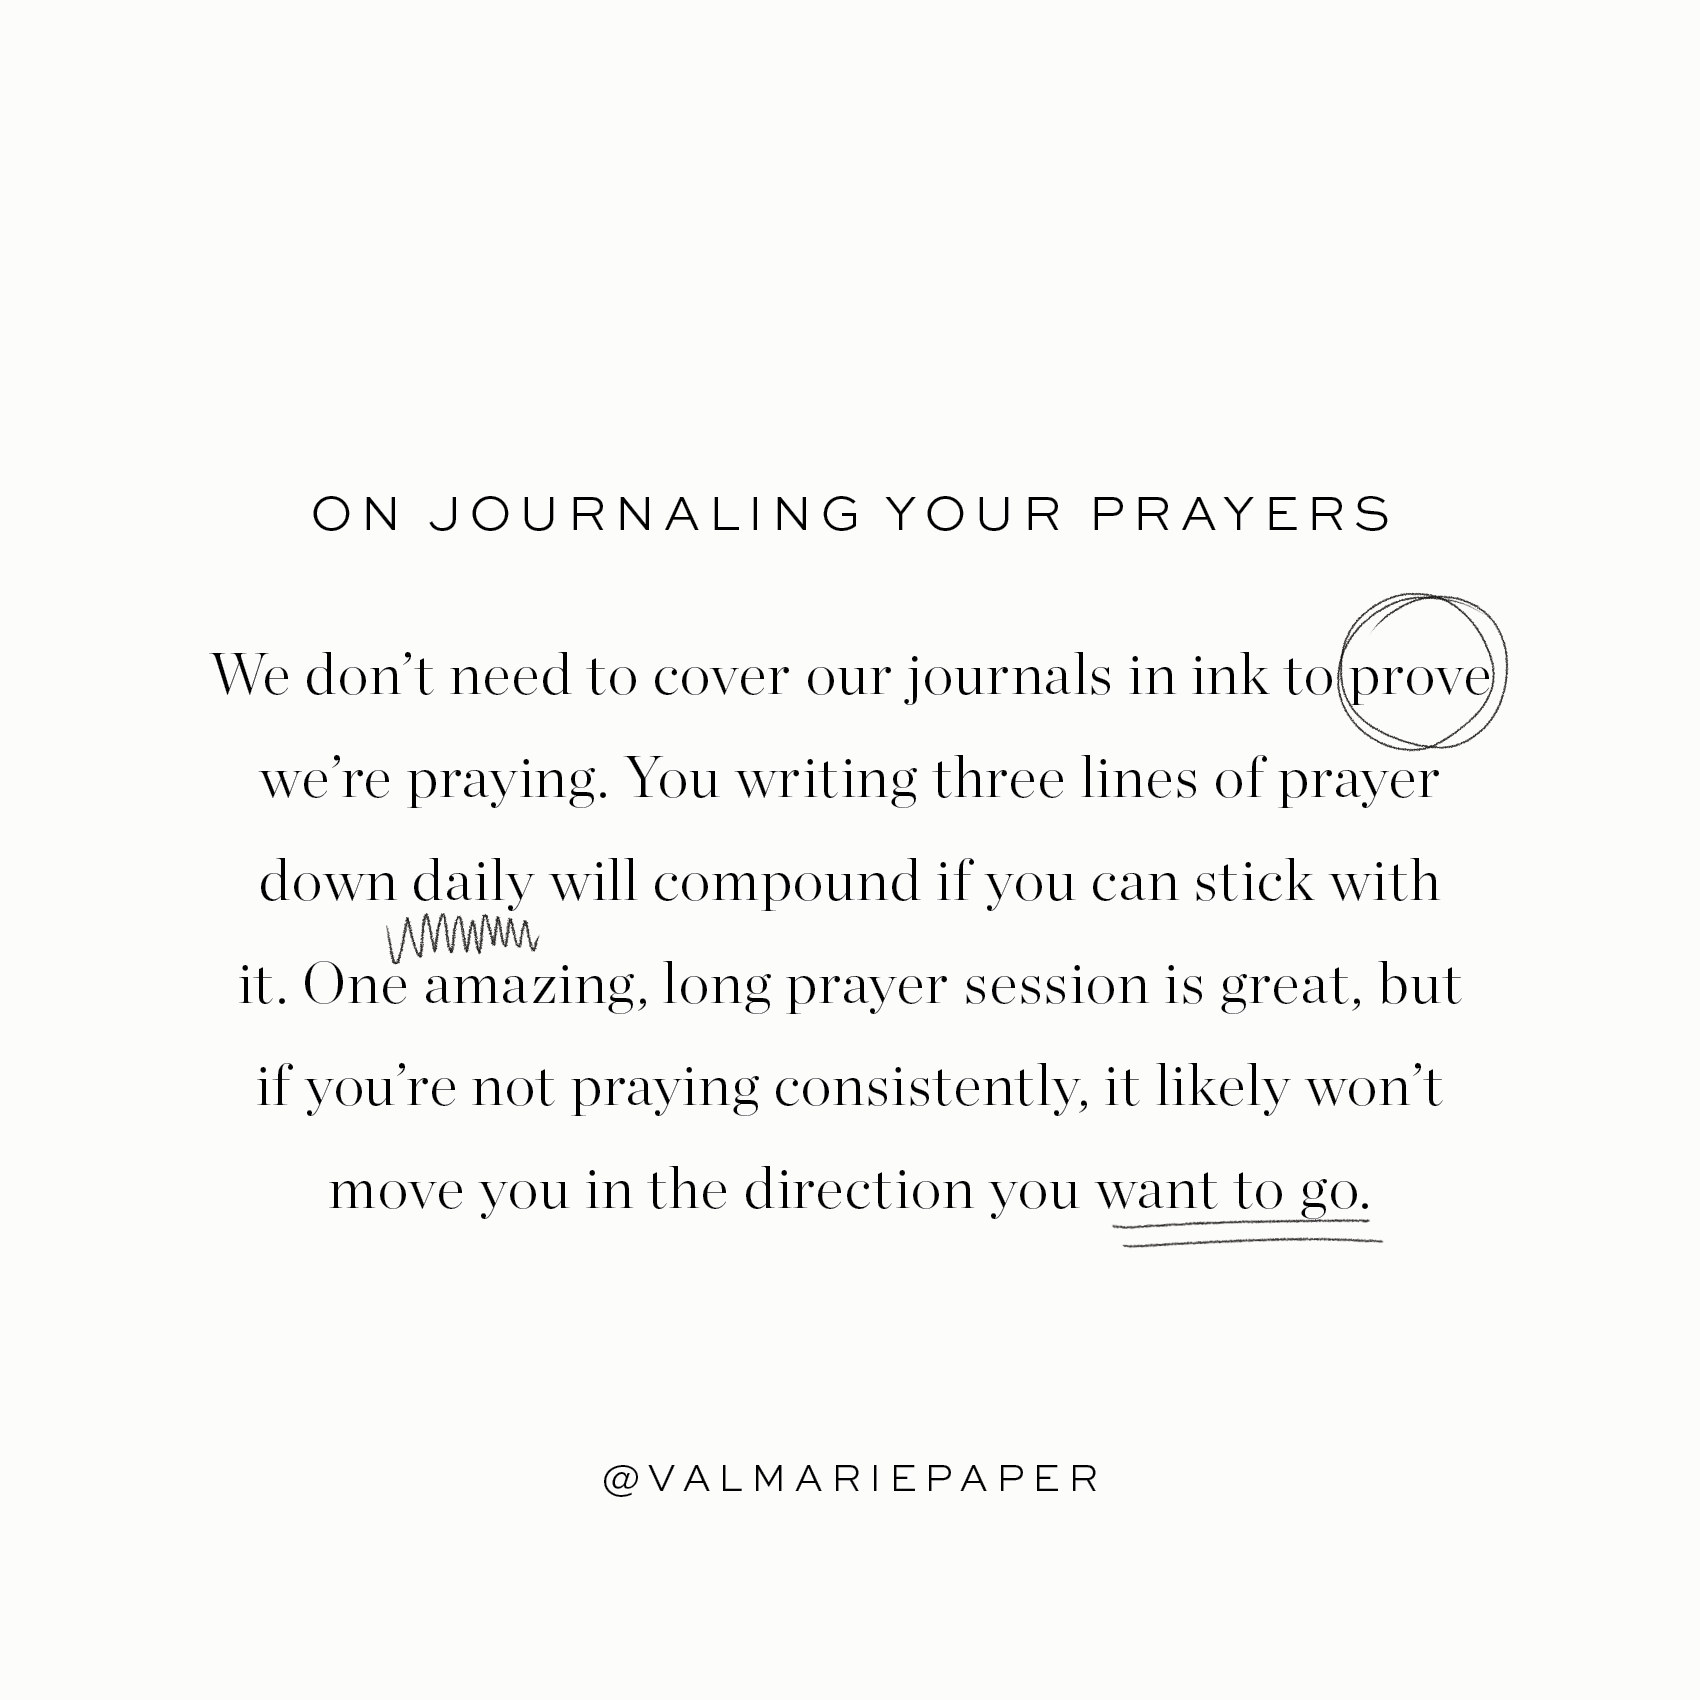 How to journal prayers daily by Valerie Woerner, ministry, prayer, refresh, praying for husband, praying for kids, prayer journal, prayer journaling, journal, journaling, prayer habit